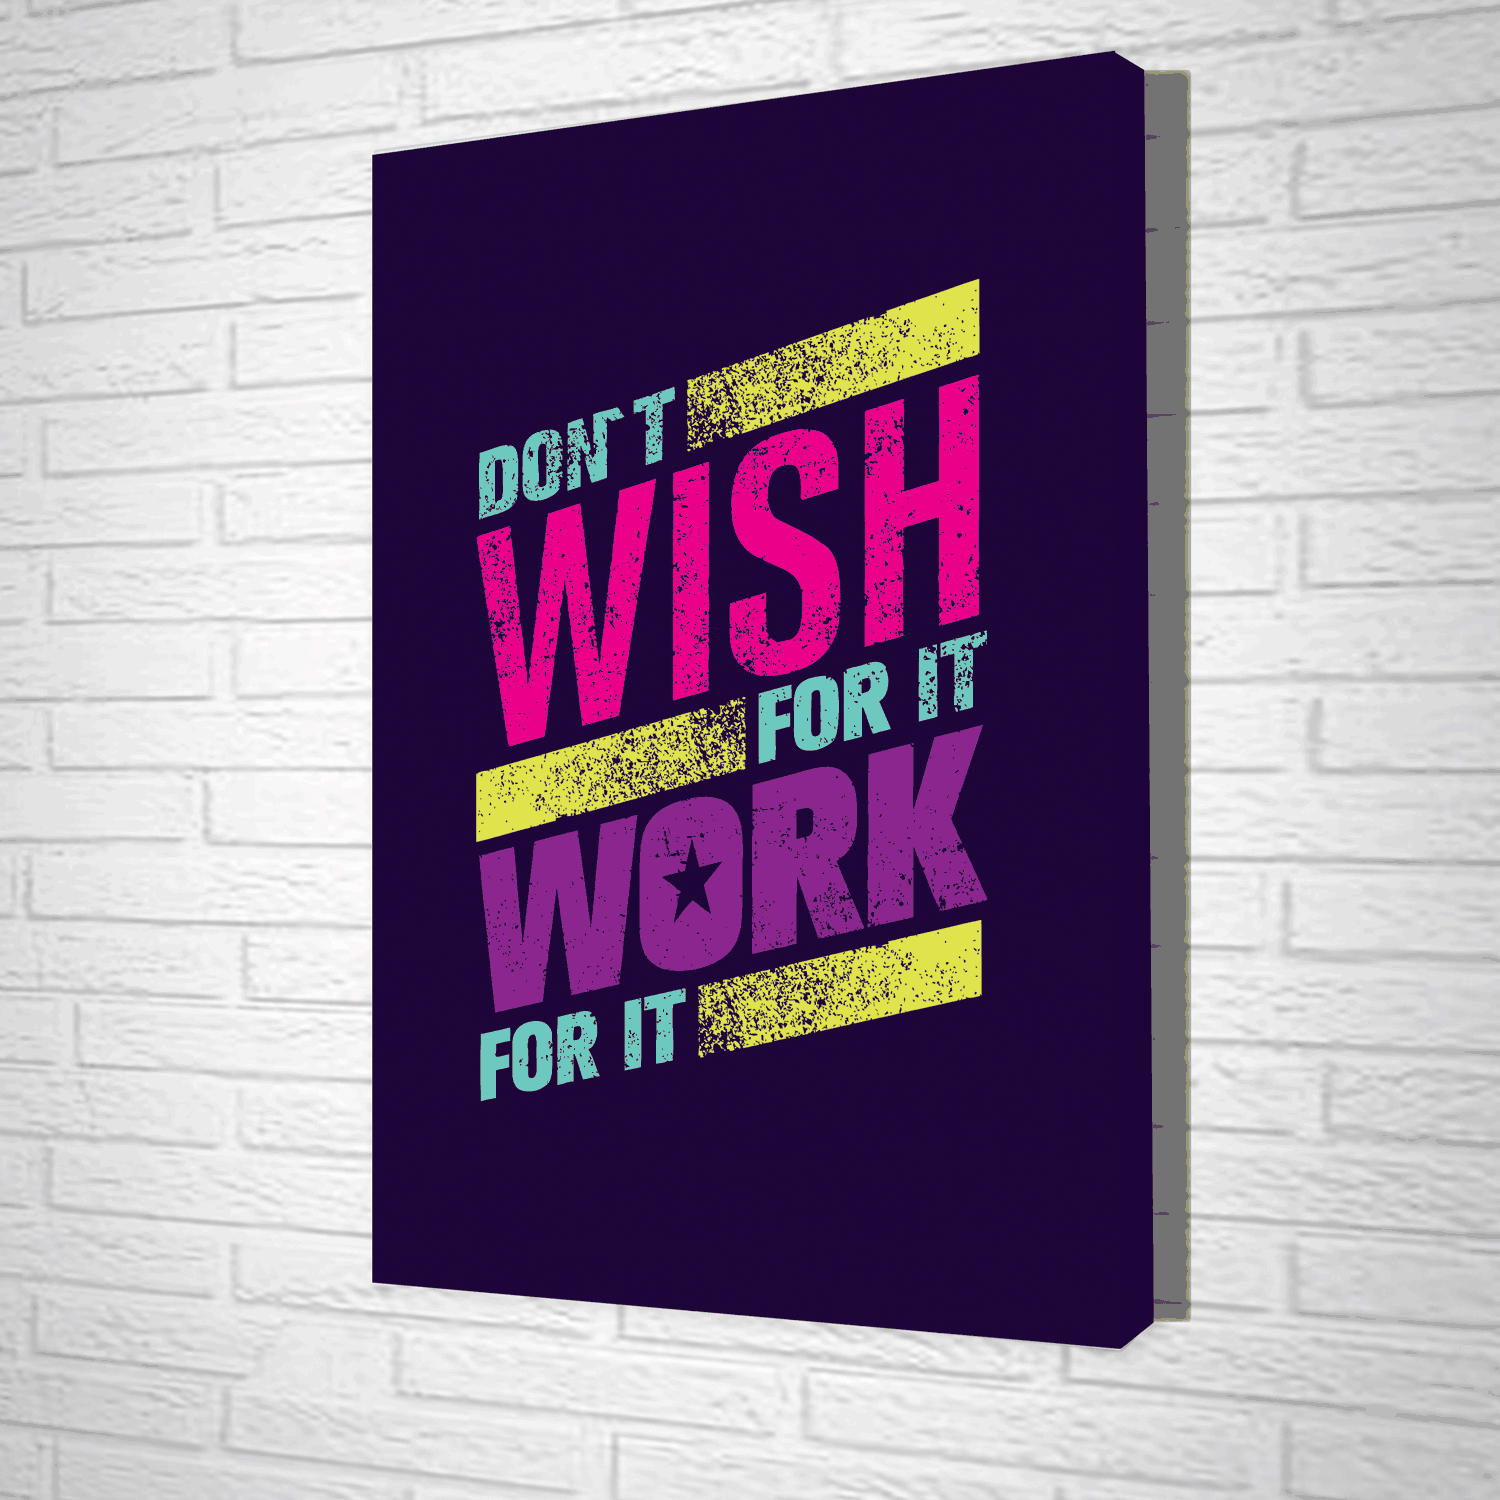 Tranh Treo Tường Don't Wish For It Work For It - TVP74